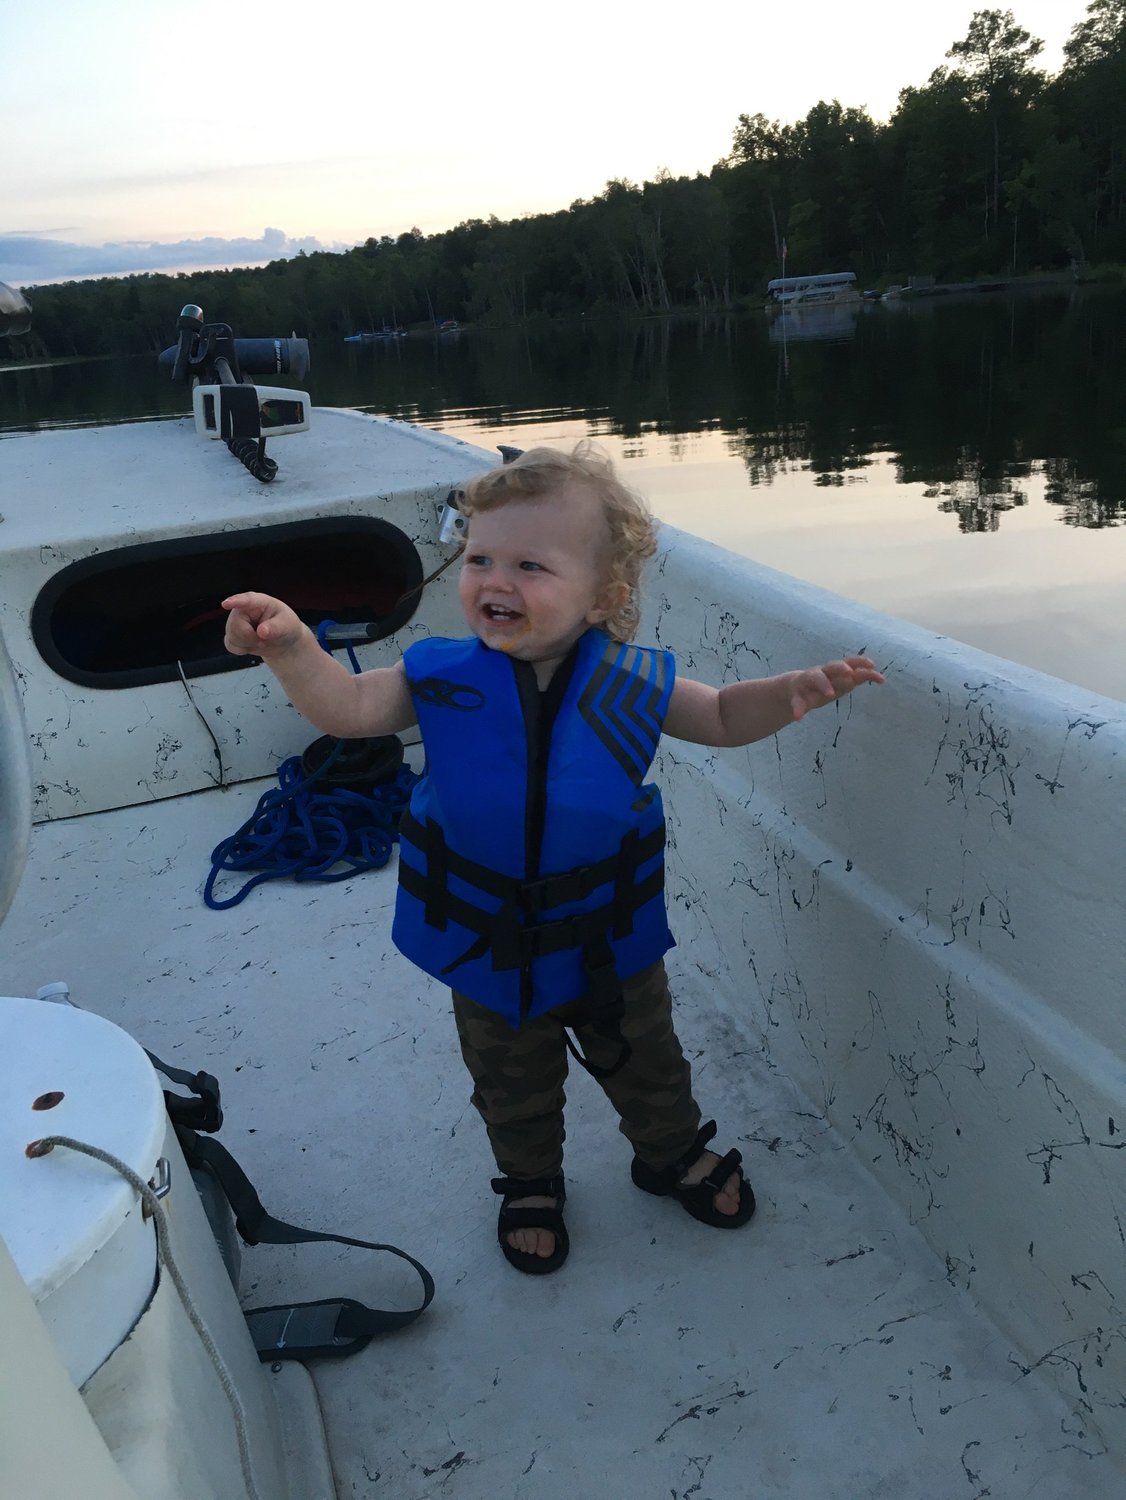 My son Rorick showed excitement on his first boating excursion.